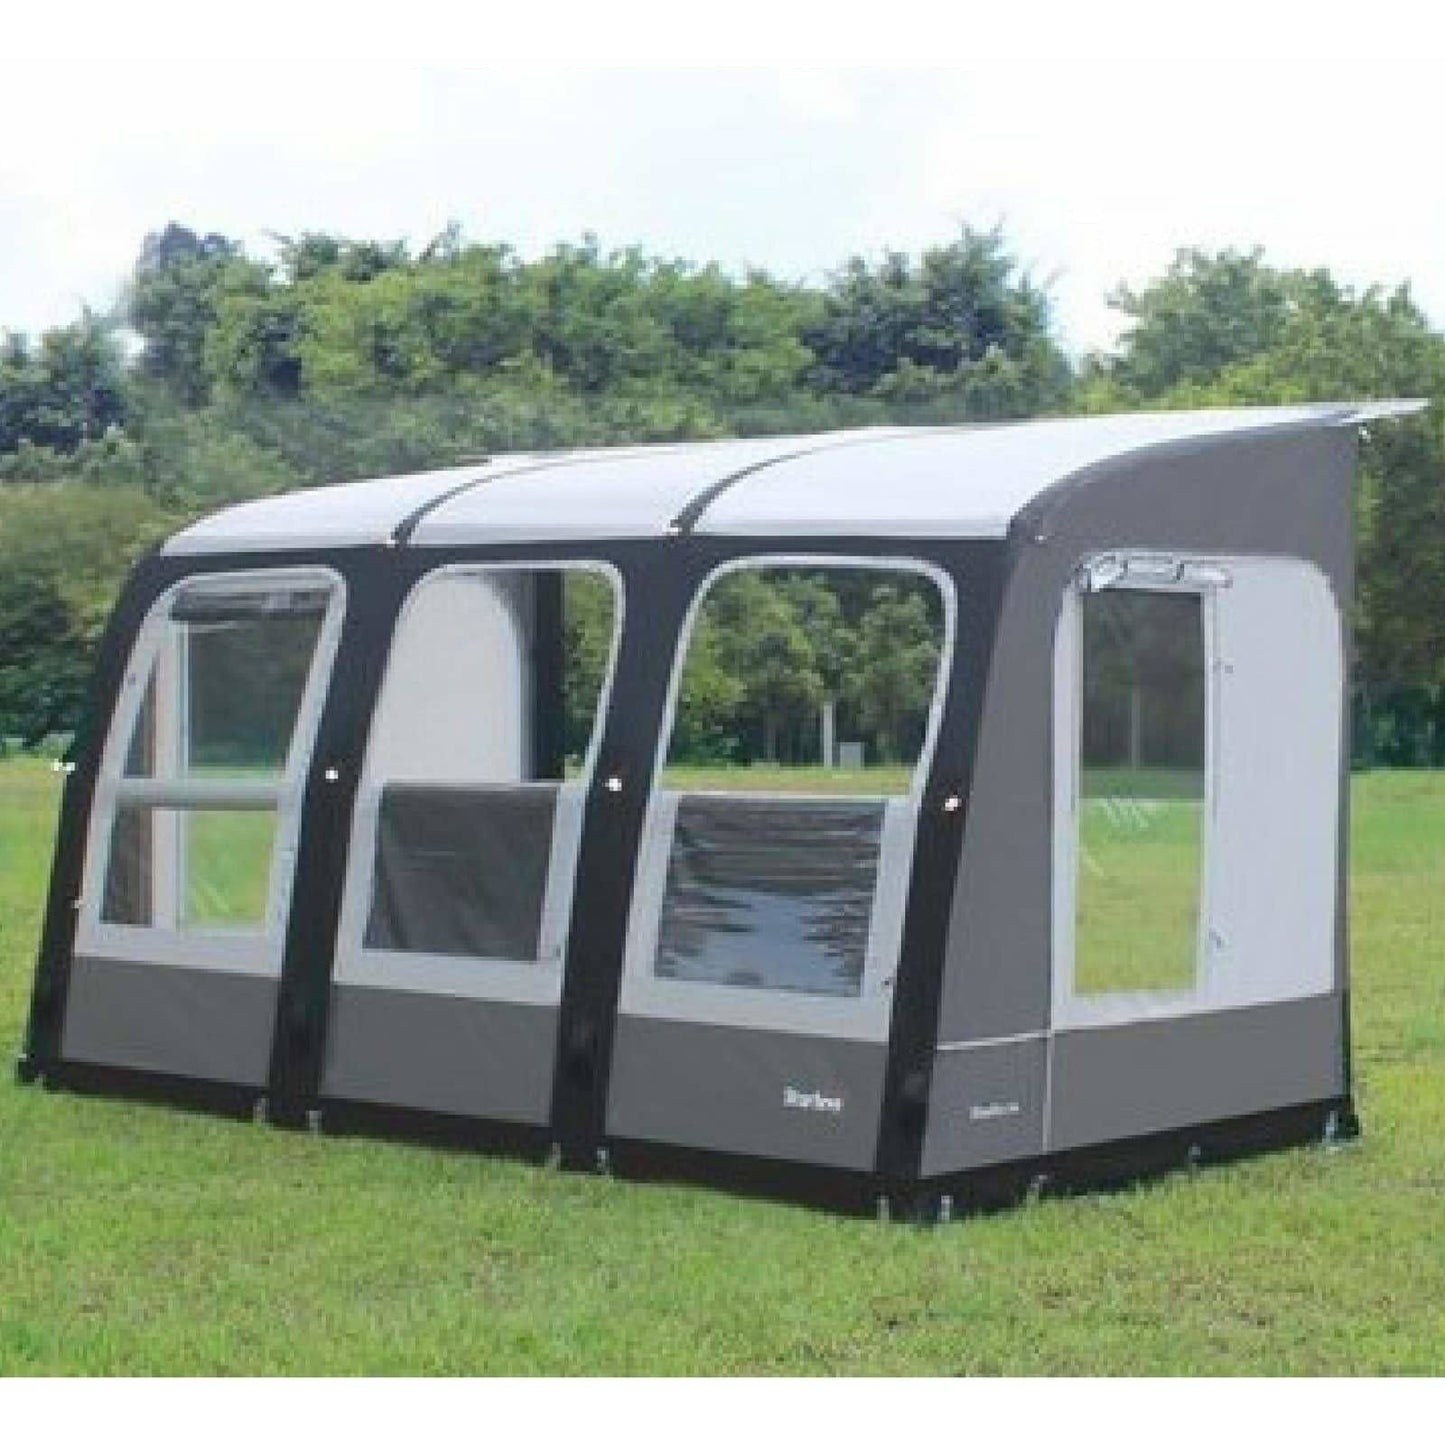 Camptech Starline 390 Blue Inflatable Air Porch Caravan Awning + FREE Straps (2019)